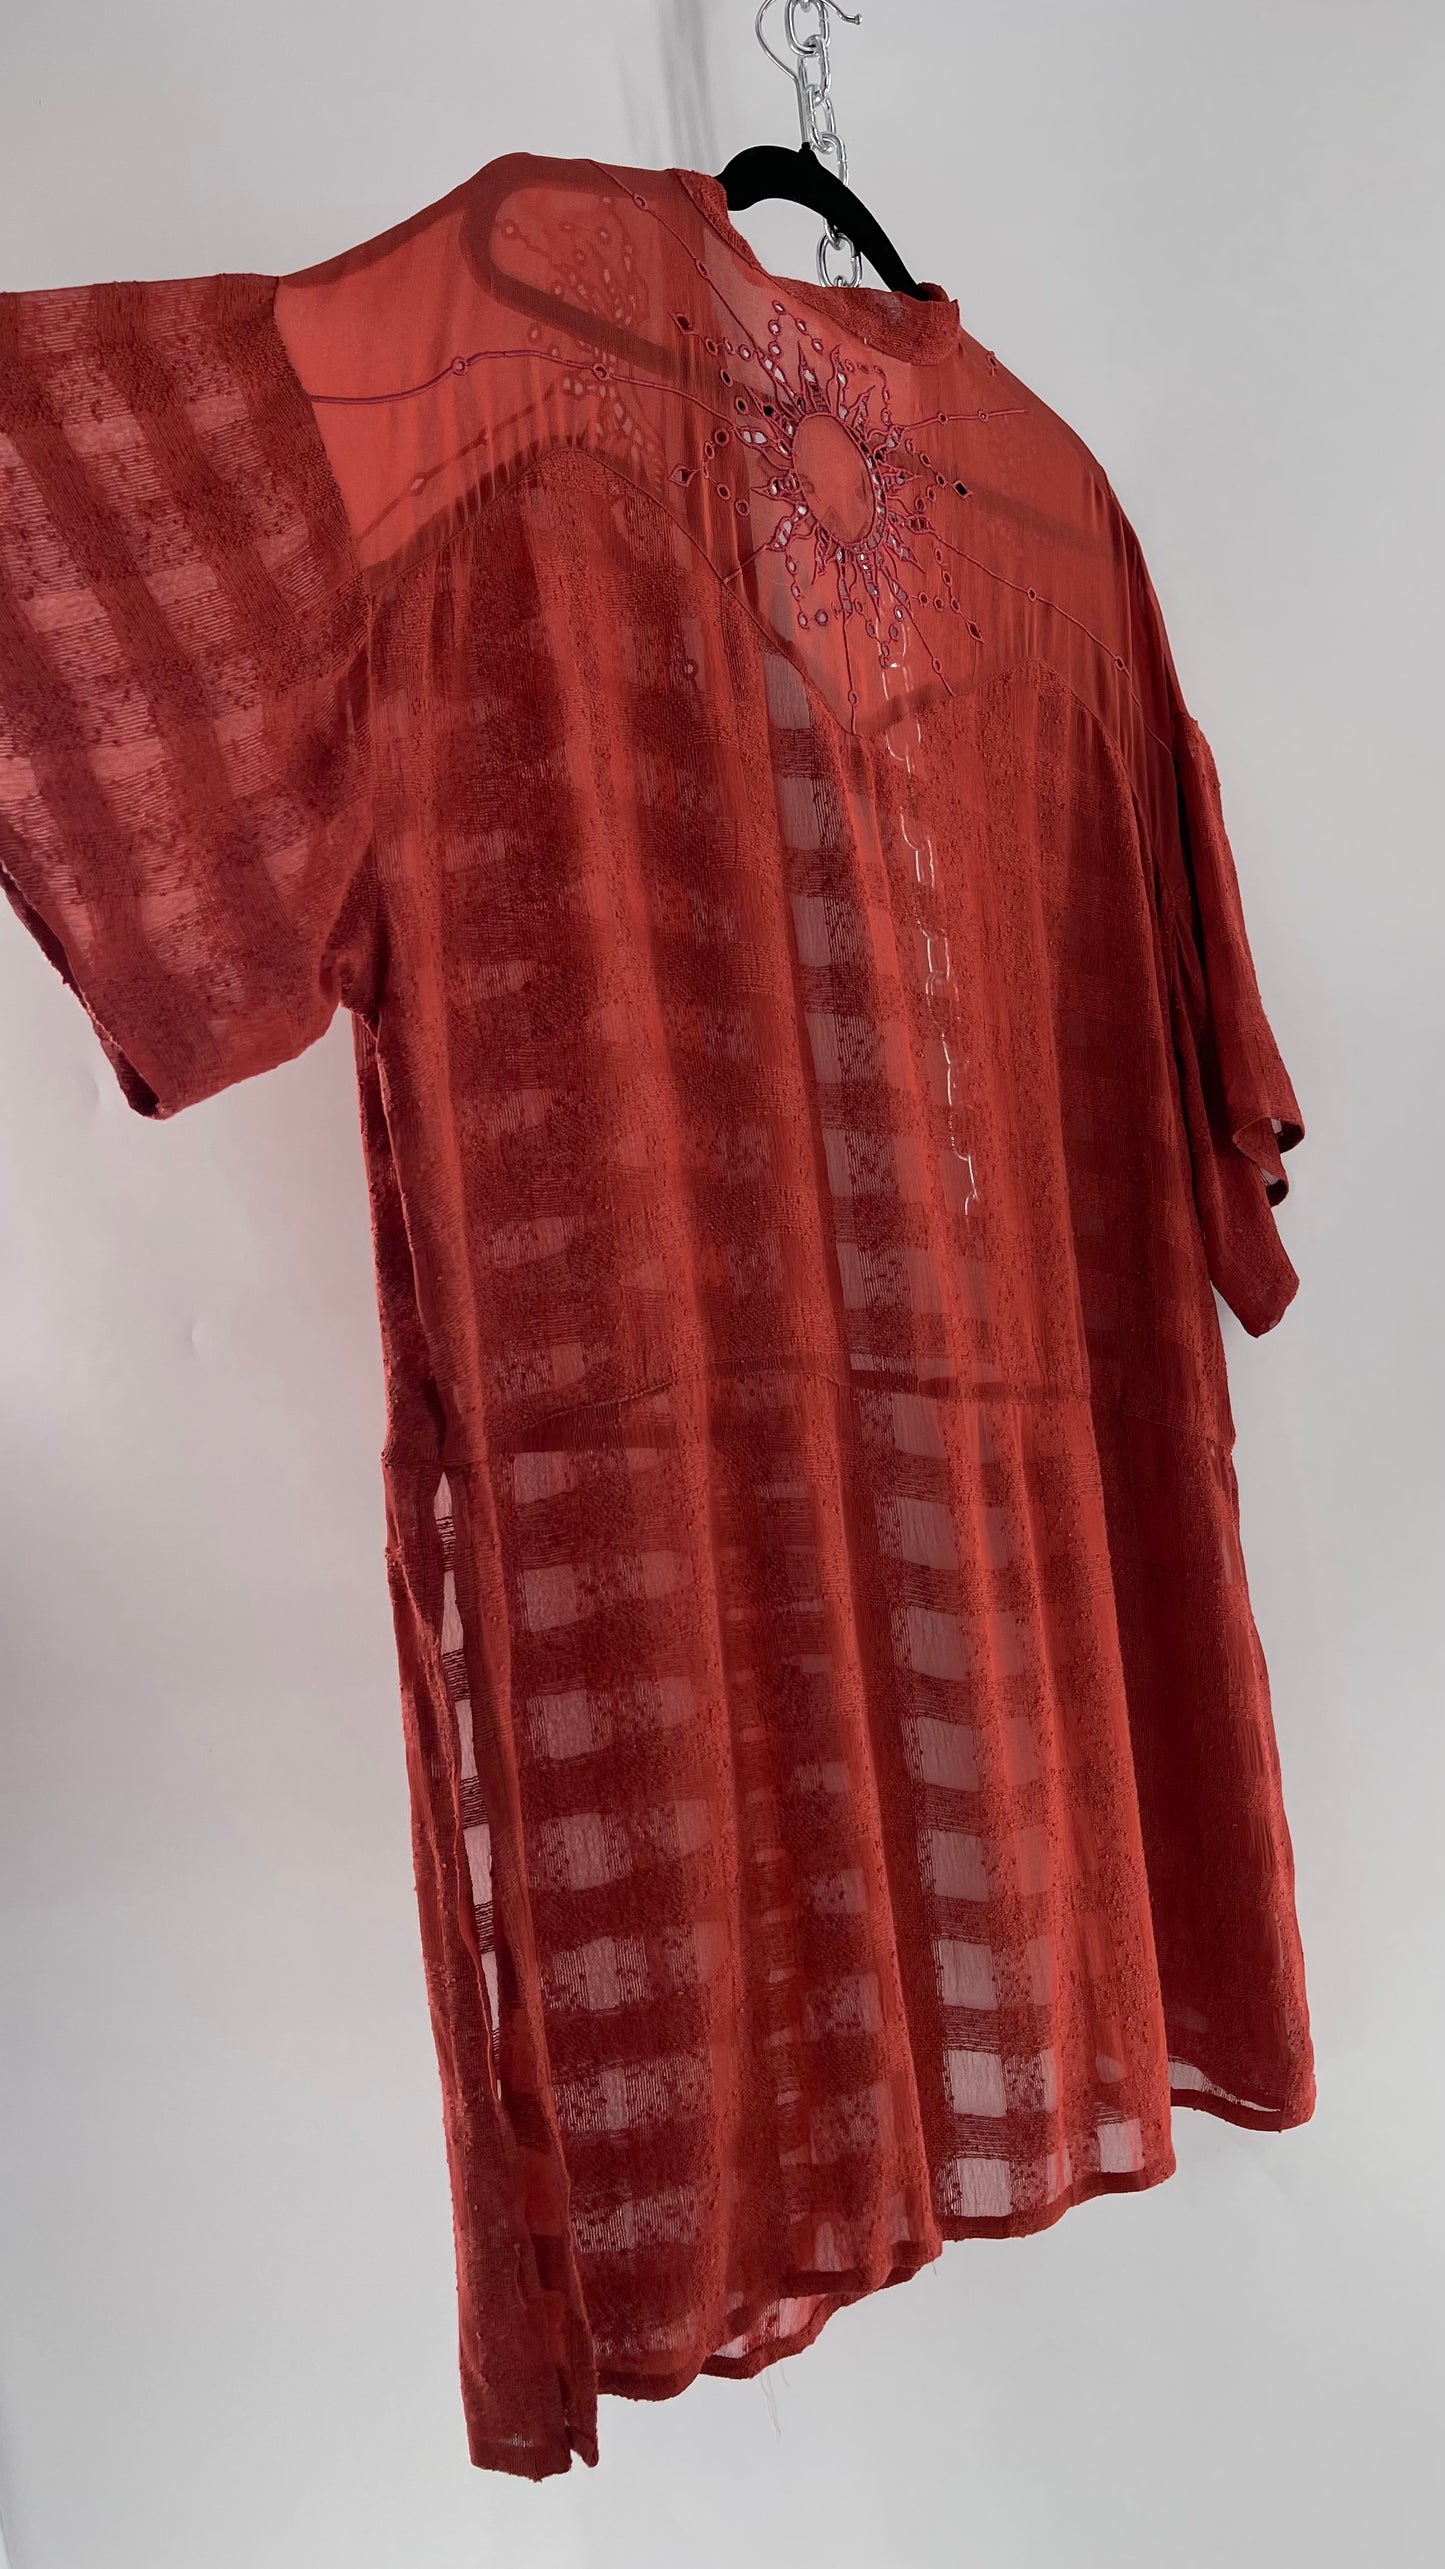 NFO Anthropologie Burnt Orange Cape With Embroidered Solstice Sun and Crescent Moon Designs (One Size)